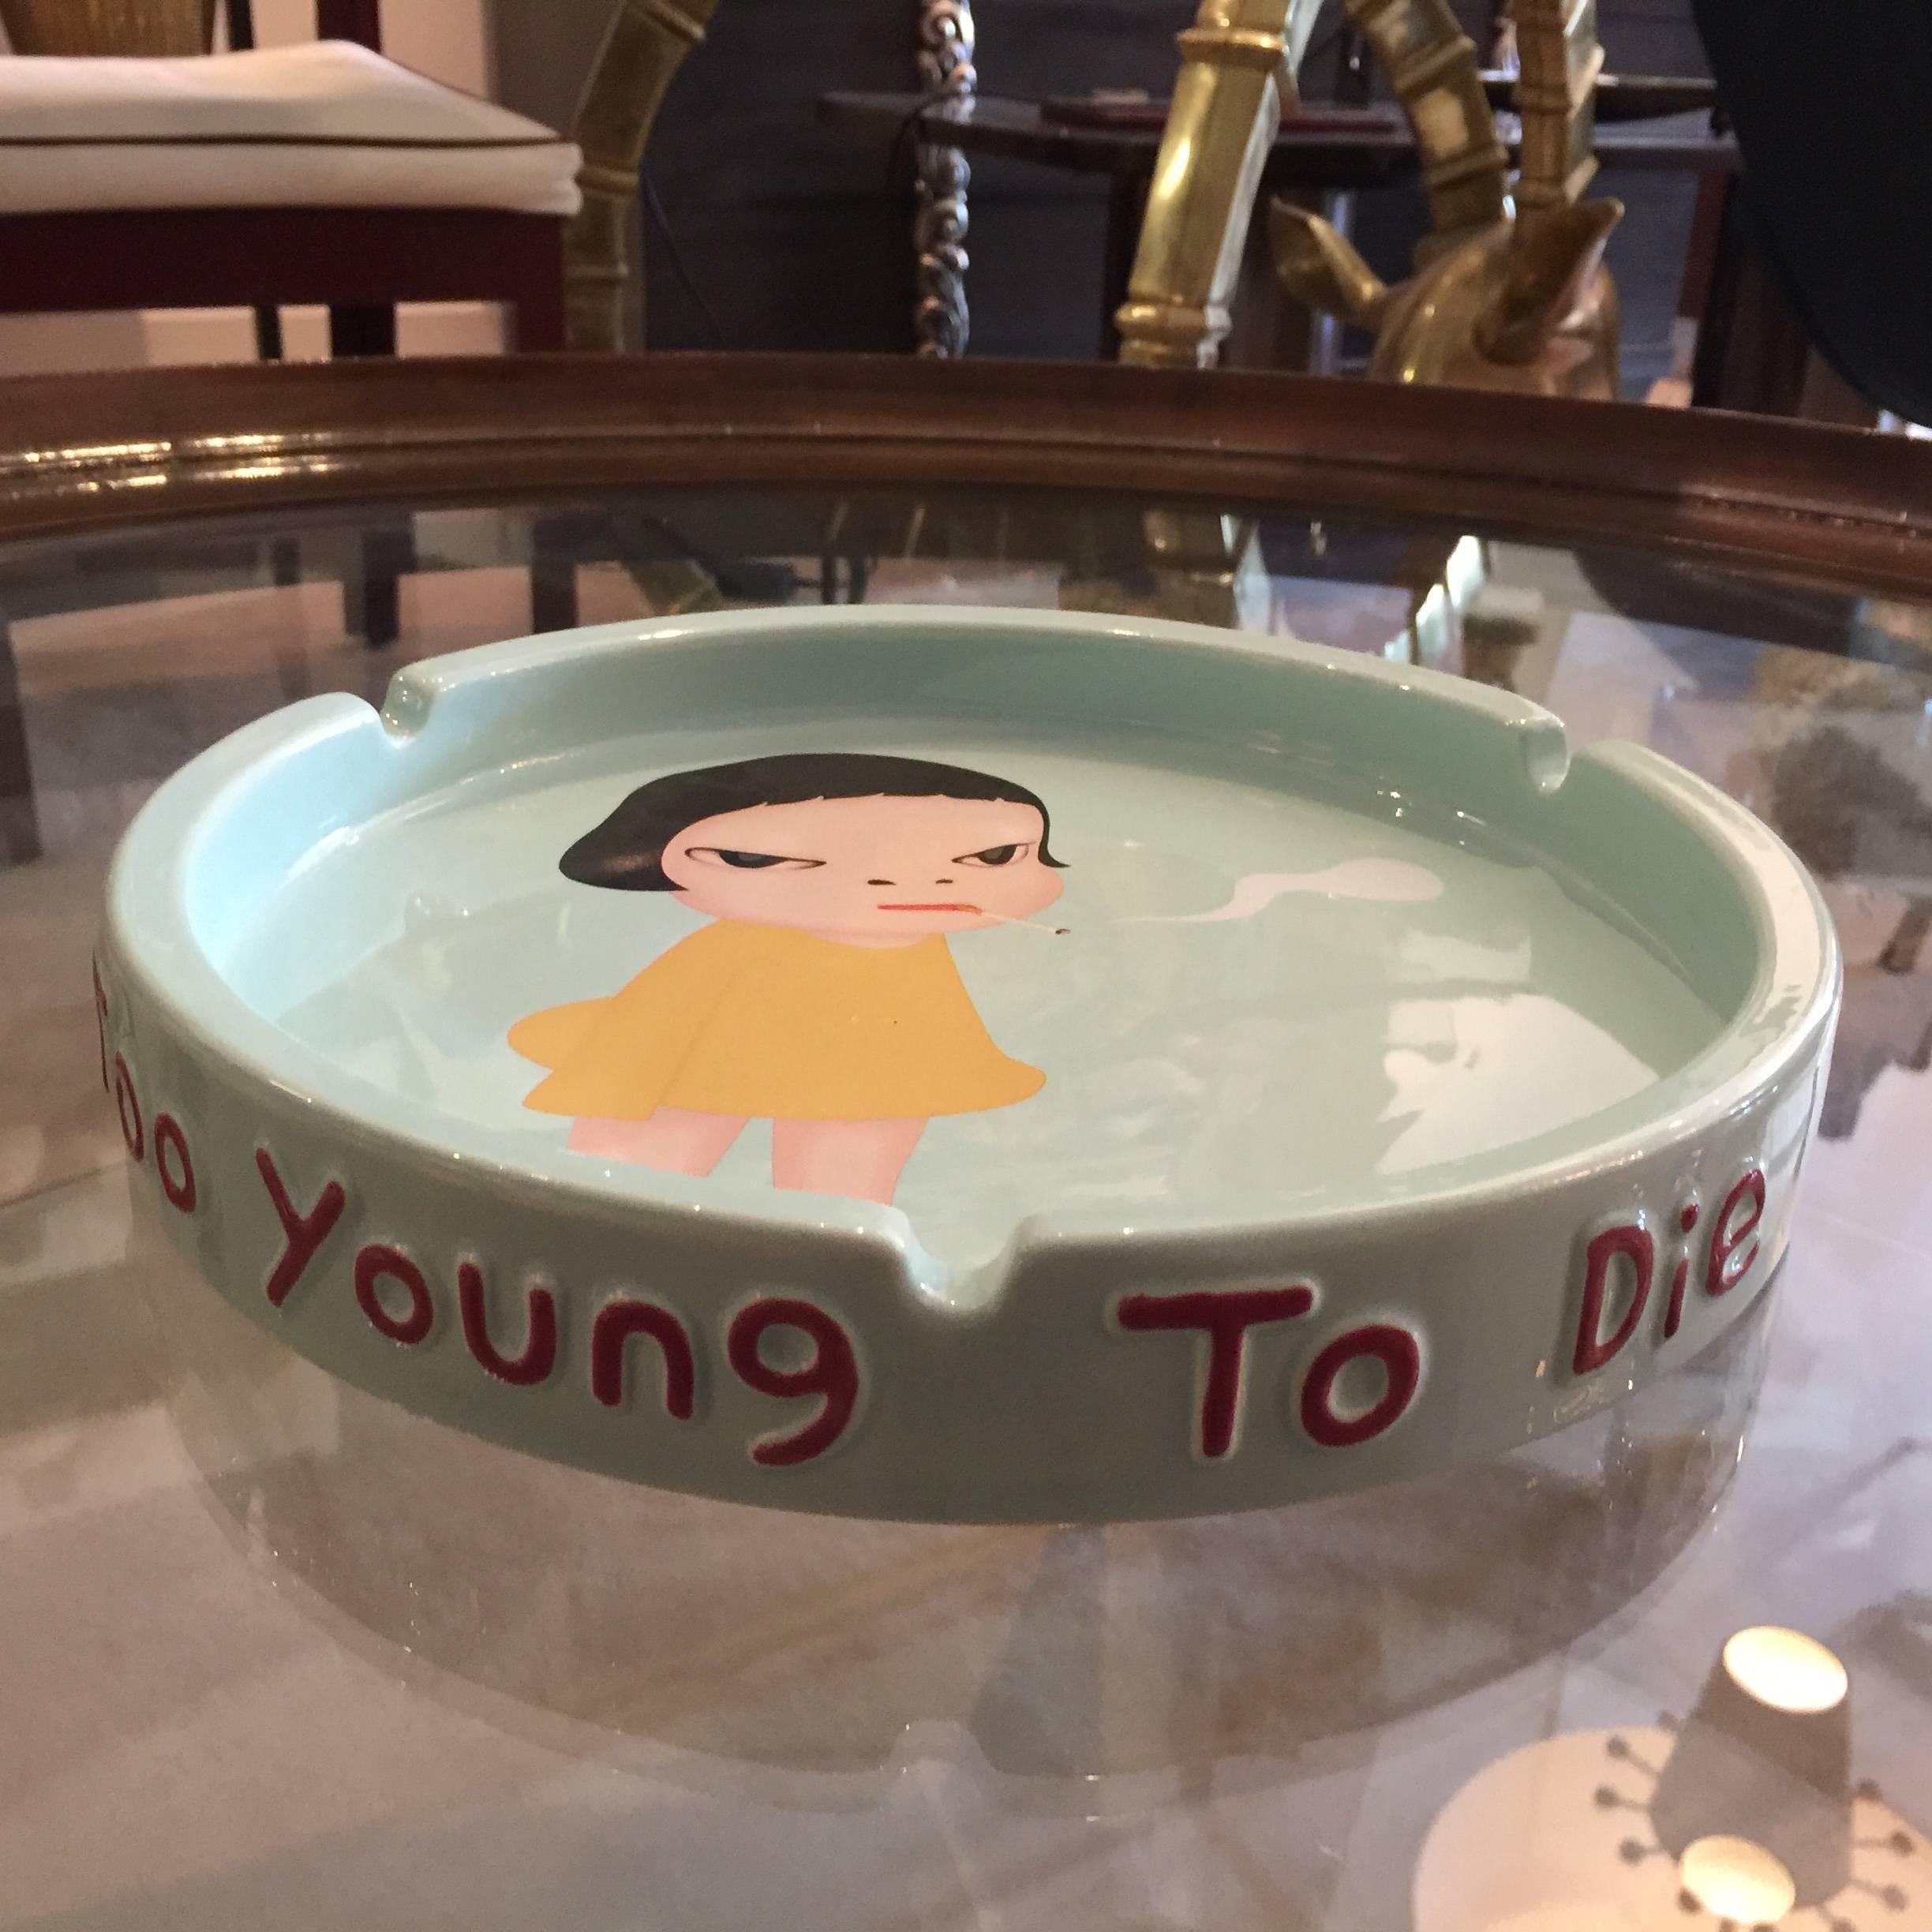 The image is from a painting entitled 'Too Young To Die' which was included in an exhibition called 'I Don't Mind, If You Forget Me' at the Yokohama Museum of Art in September 2001. At 10 inches in diameter, this ashtray can double as a dish! The